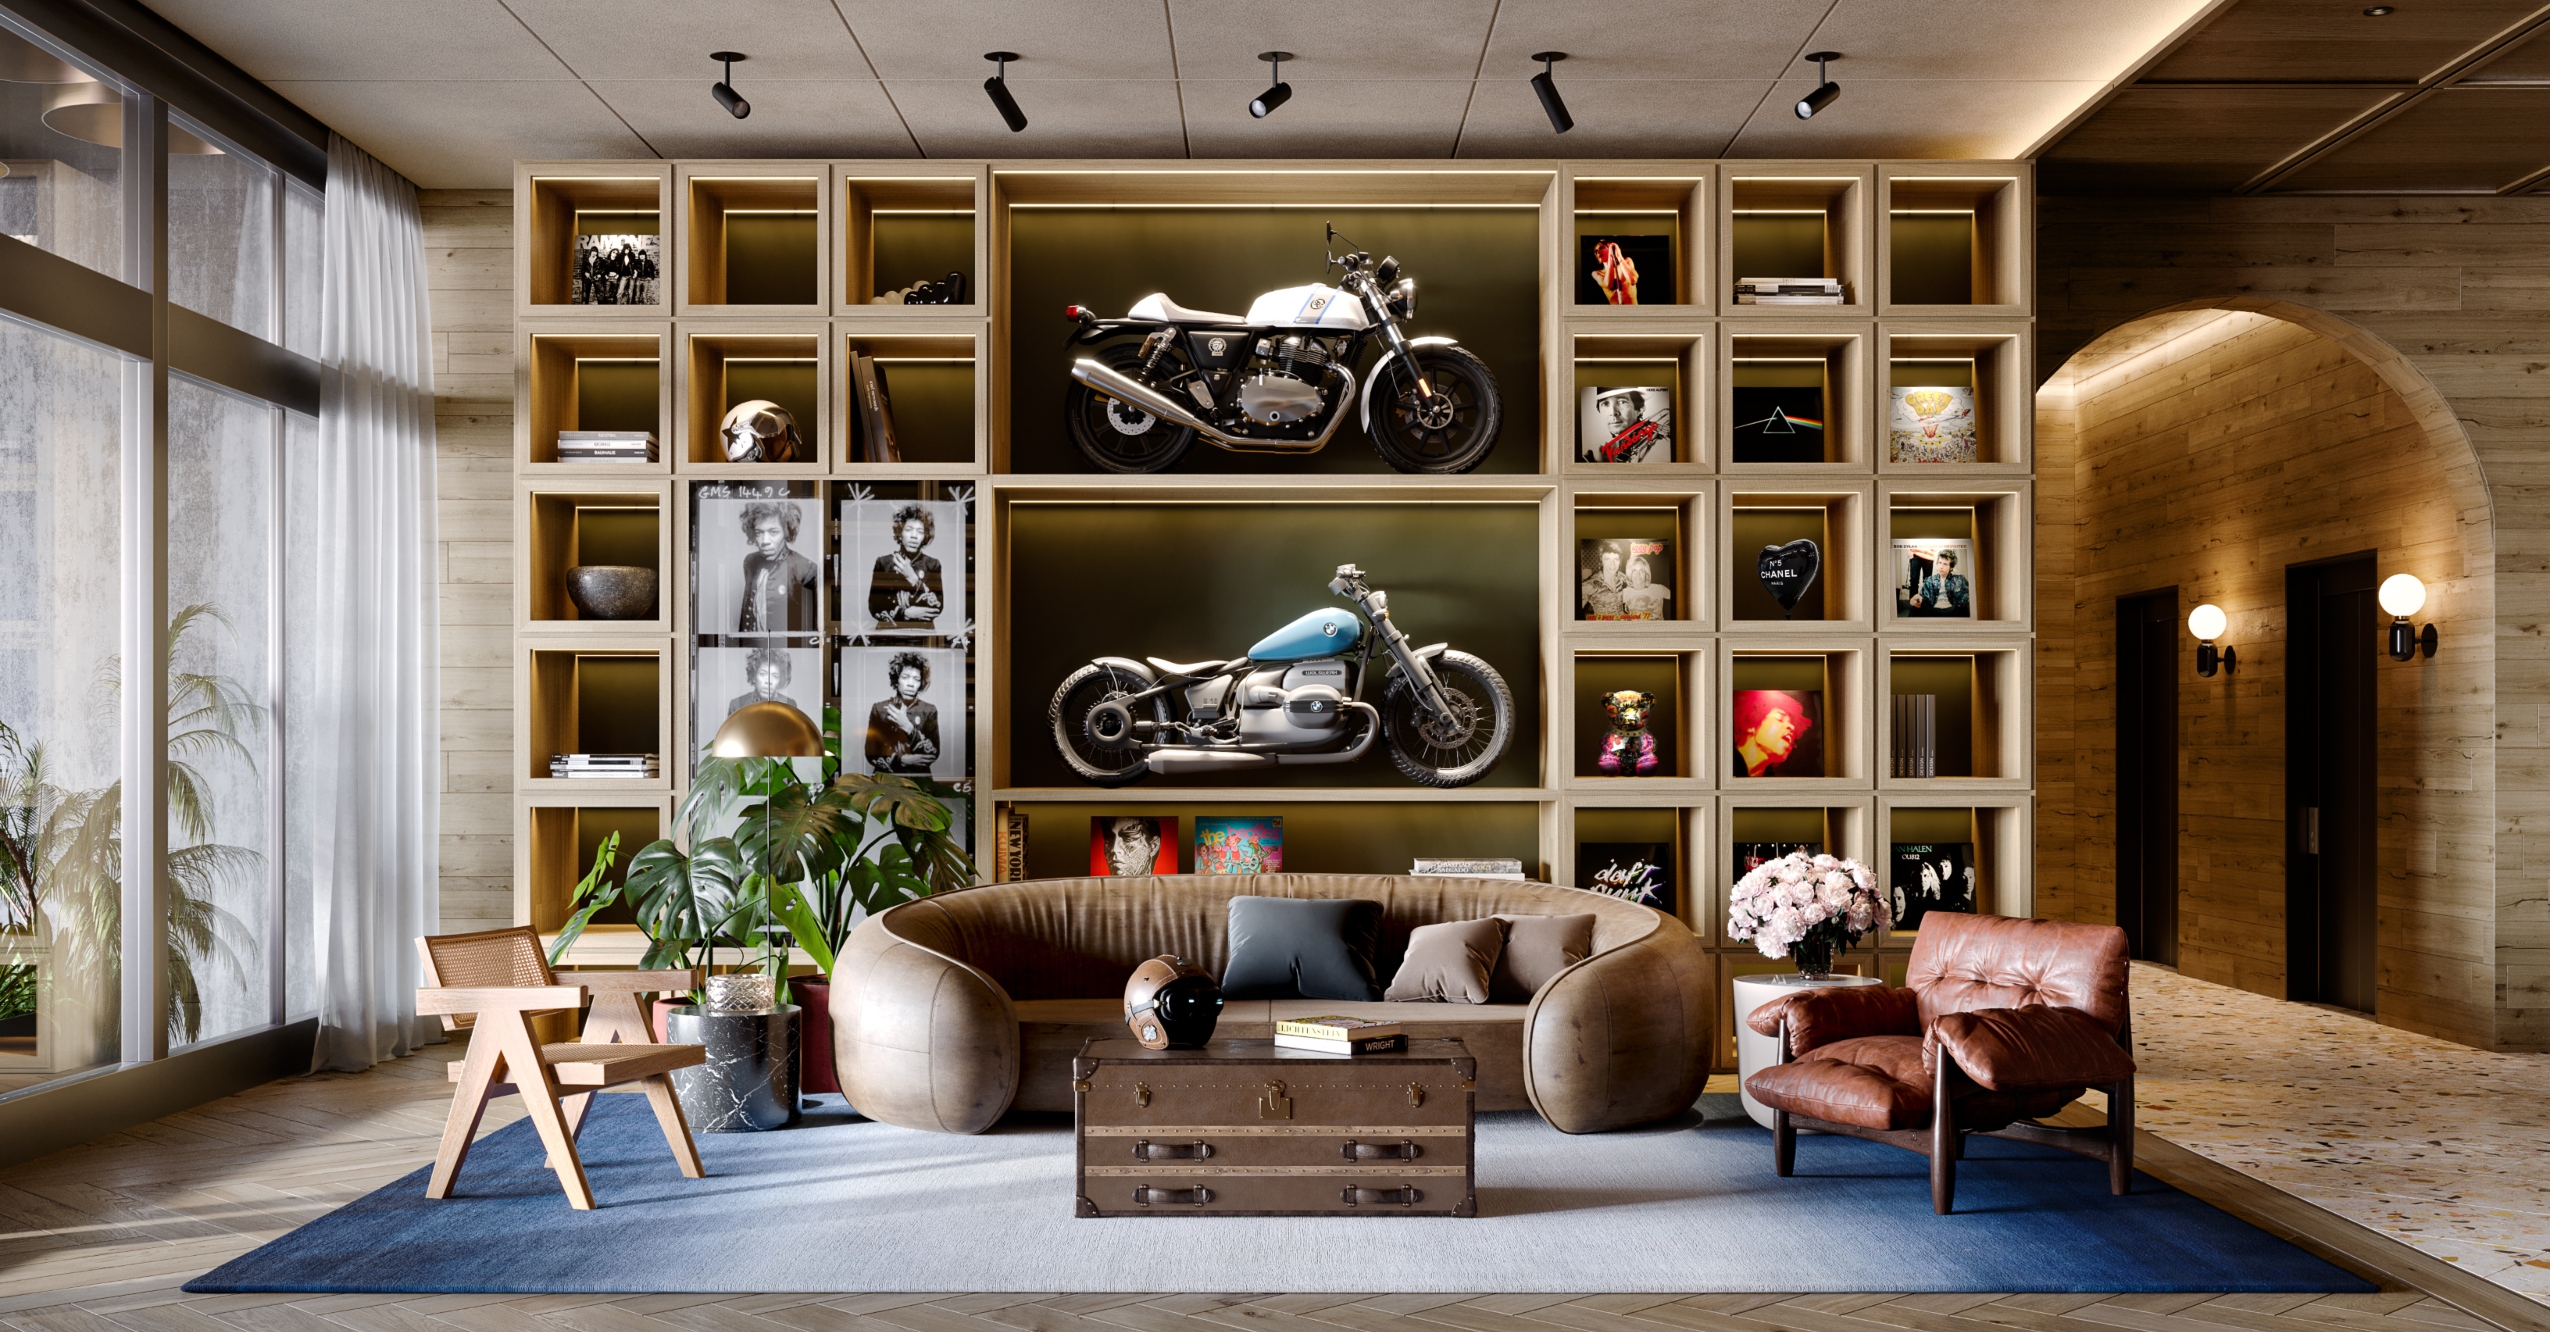 This Miami Condo Complex Will Feature Retro Motorcycles Among Its Stylish Decor